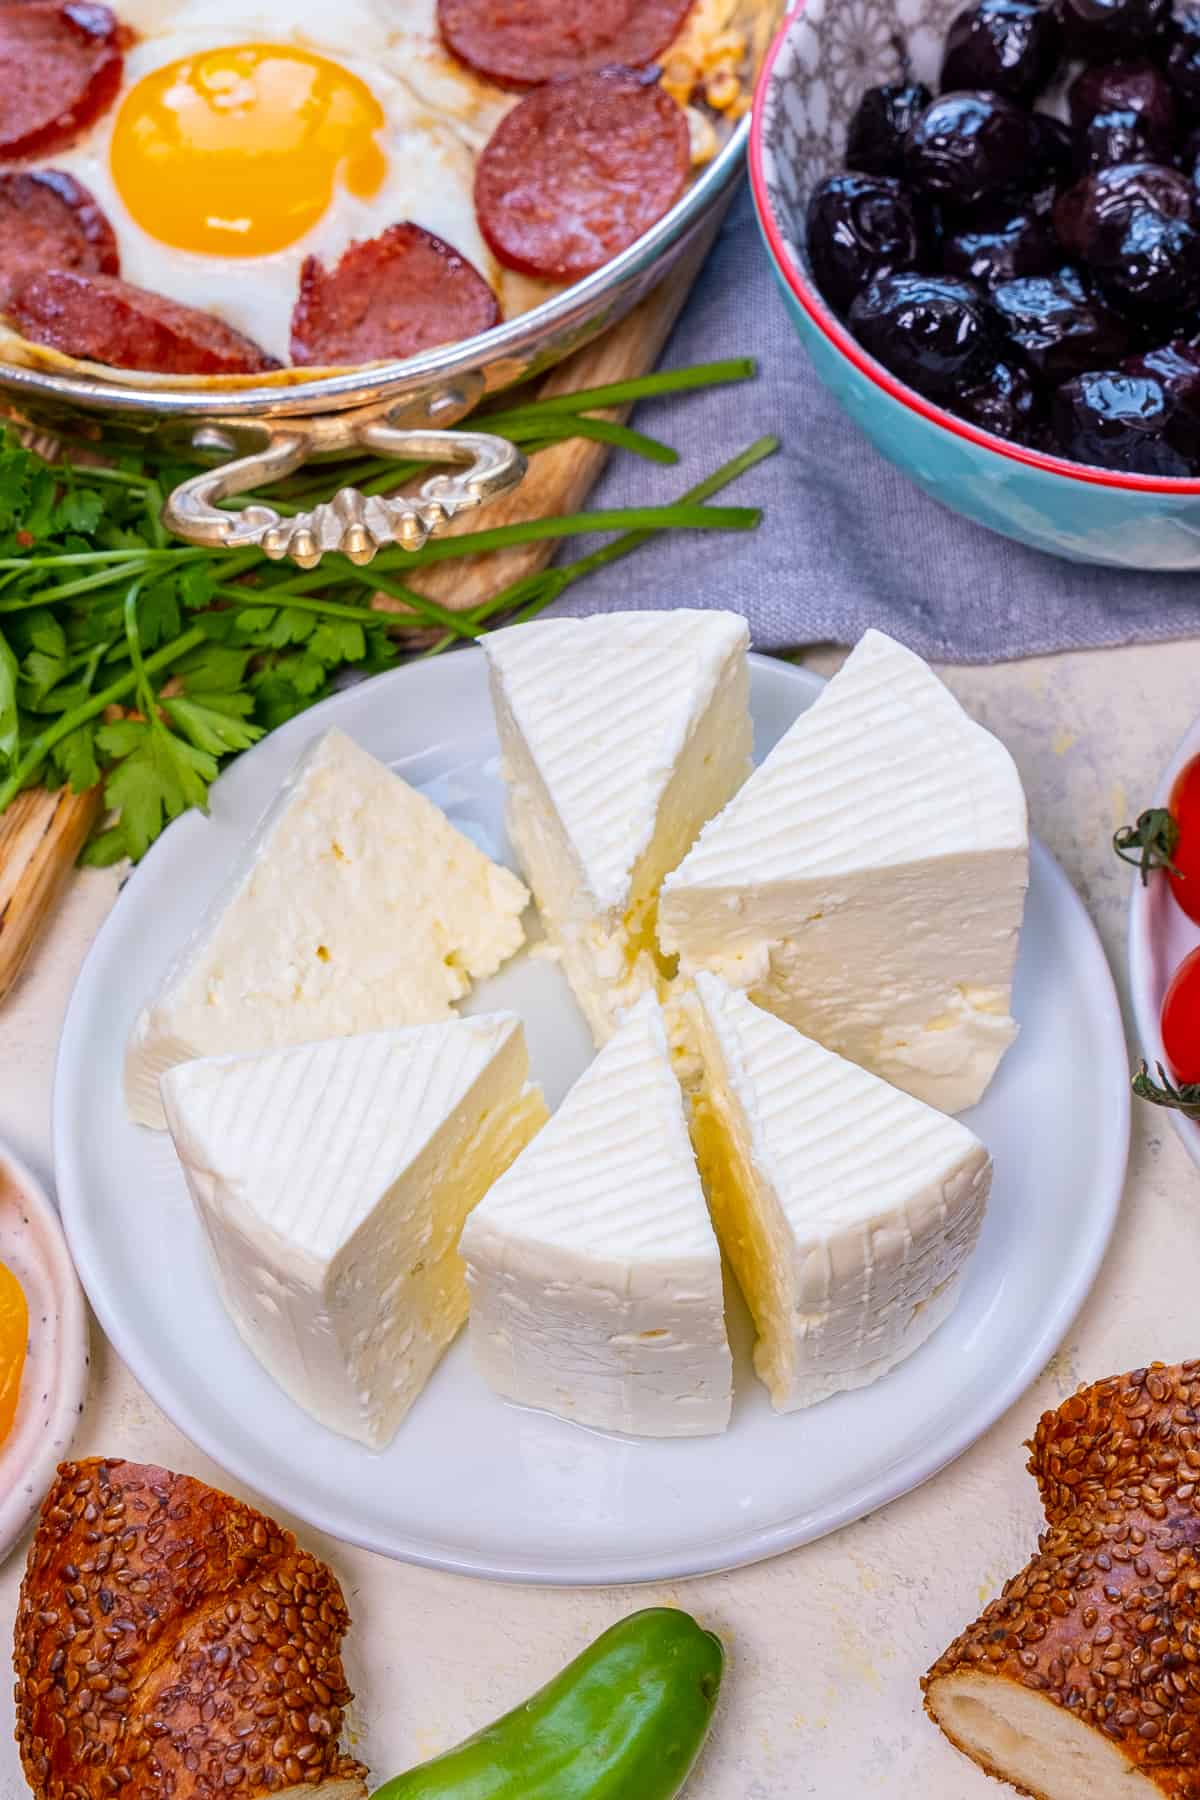 Turkish cheese sliced on a white plate, other breakfast foods around it.